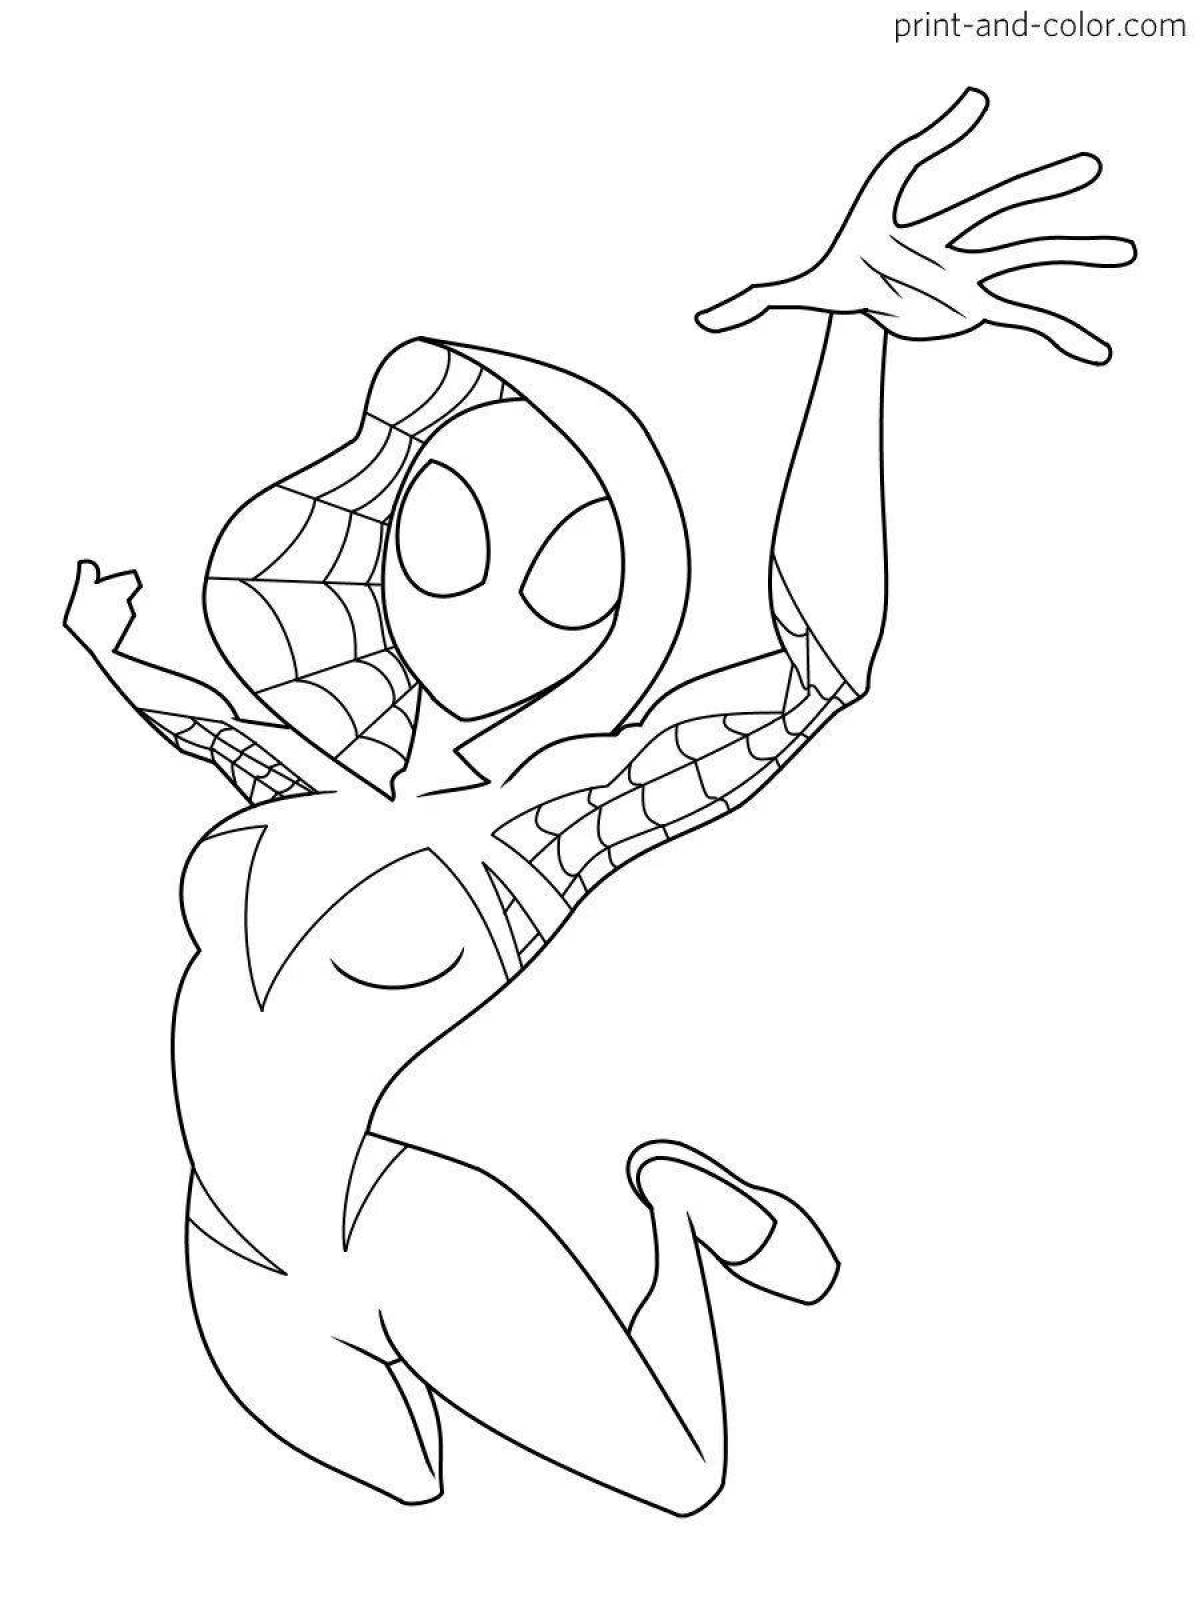 Colorful spider woman coloring page